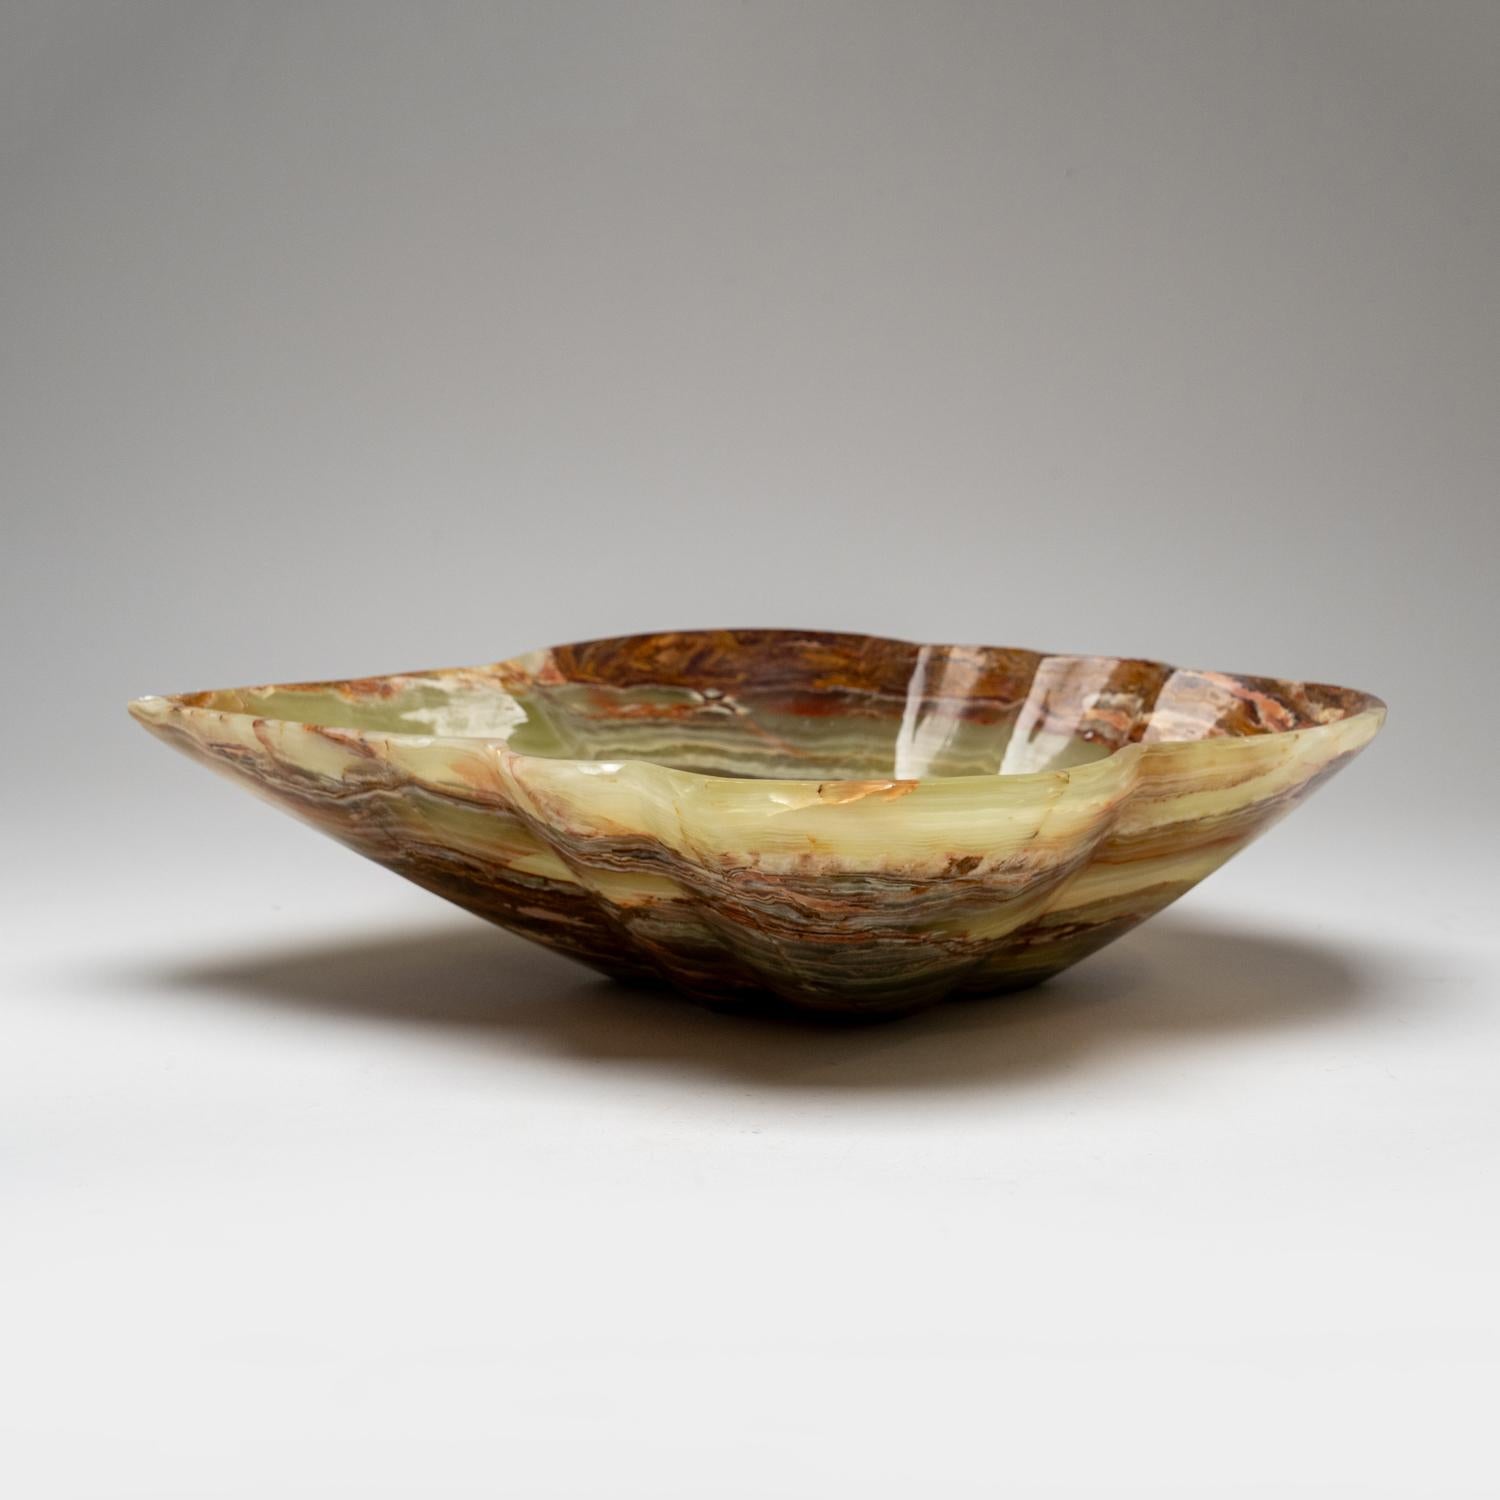 This unique free-form decorative bowl, constructed from a single chunk of natural onyx, features stunningly polished mirror finish and rich, earthy tones that blend white, honey and brown shades. An ideal centerpiece with its captivating translucent